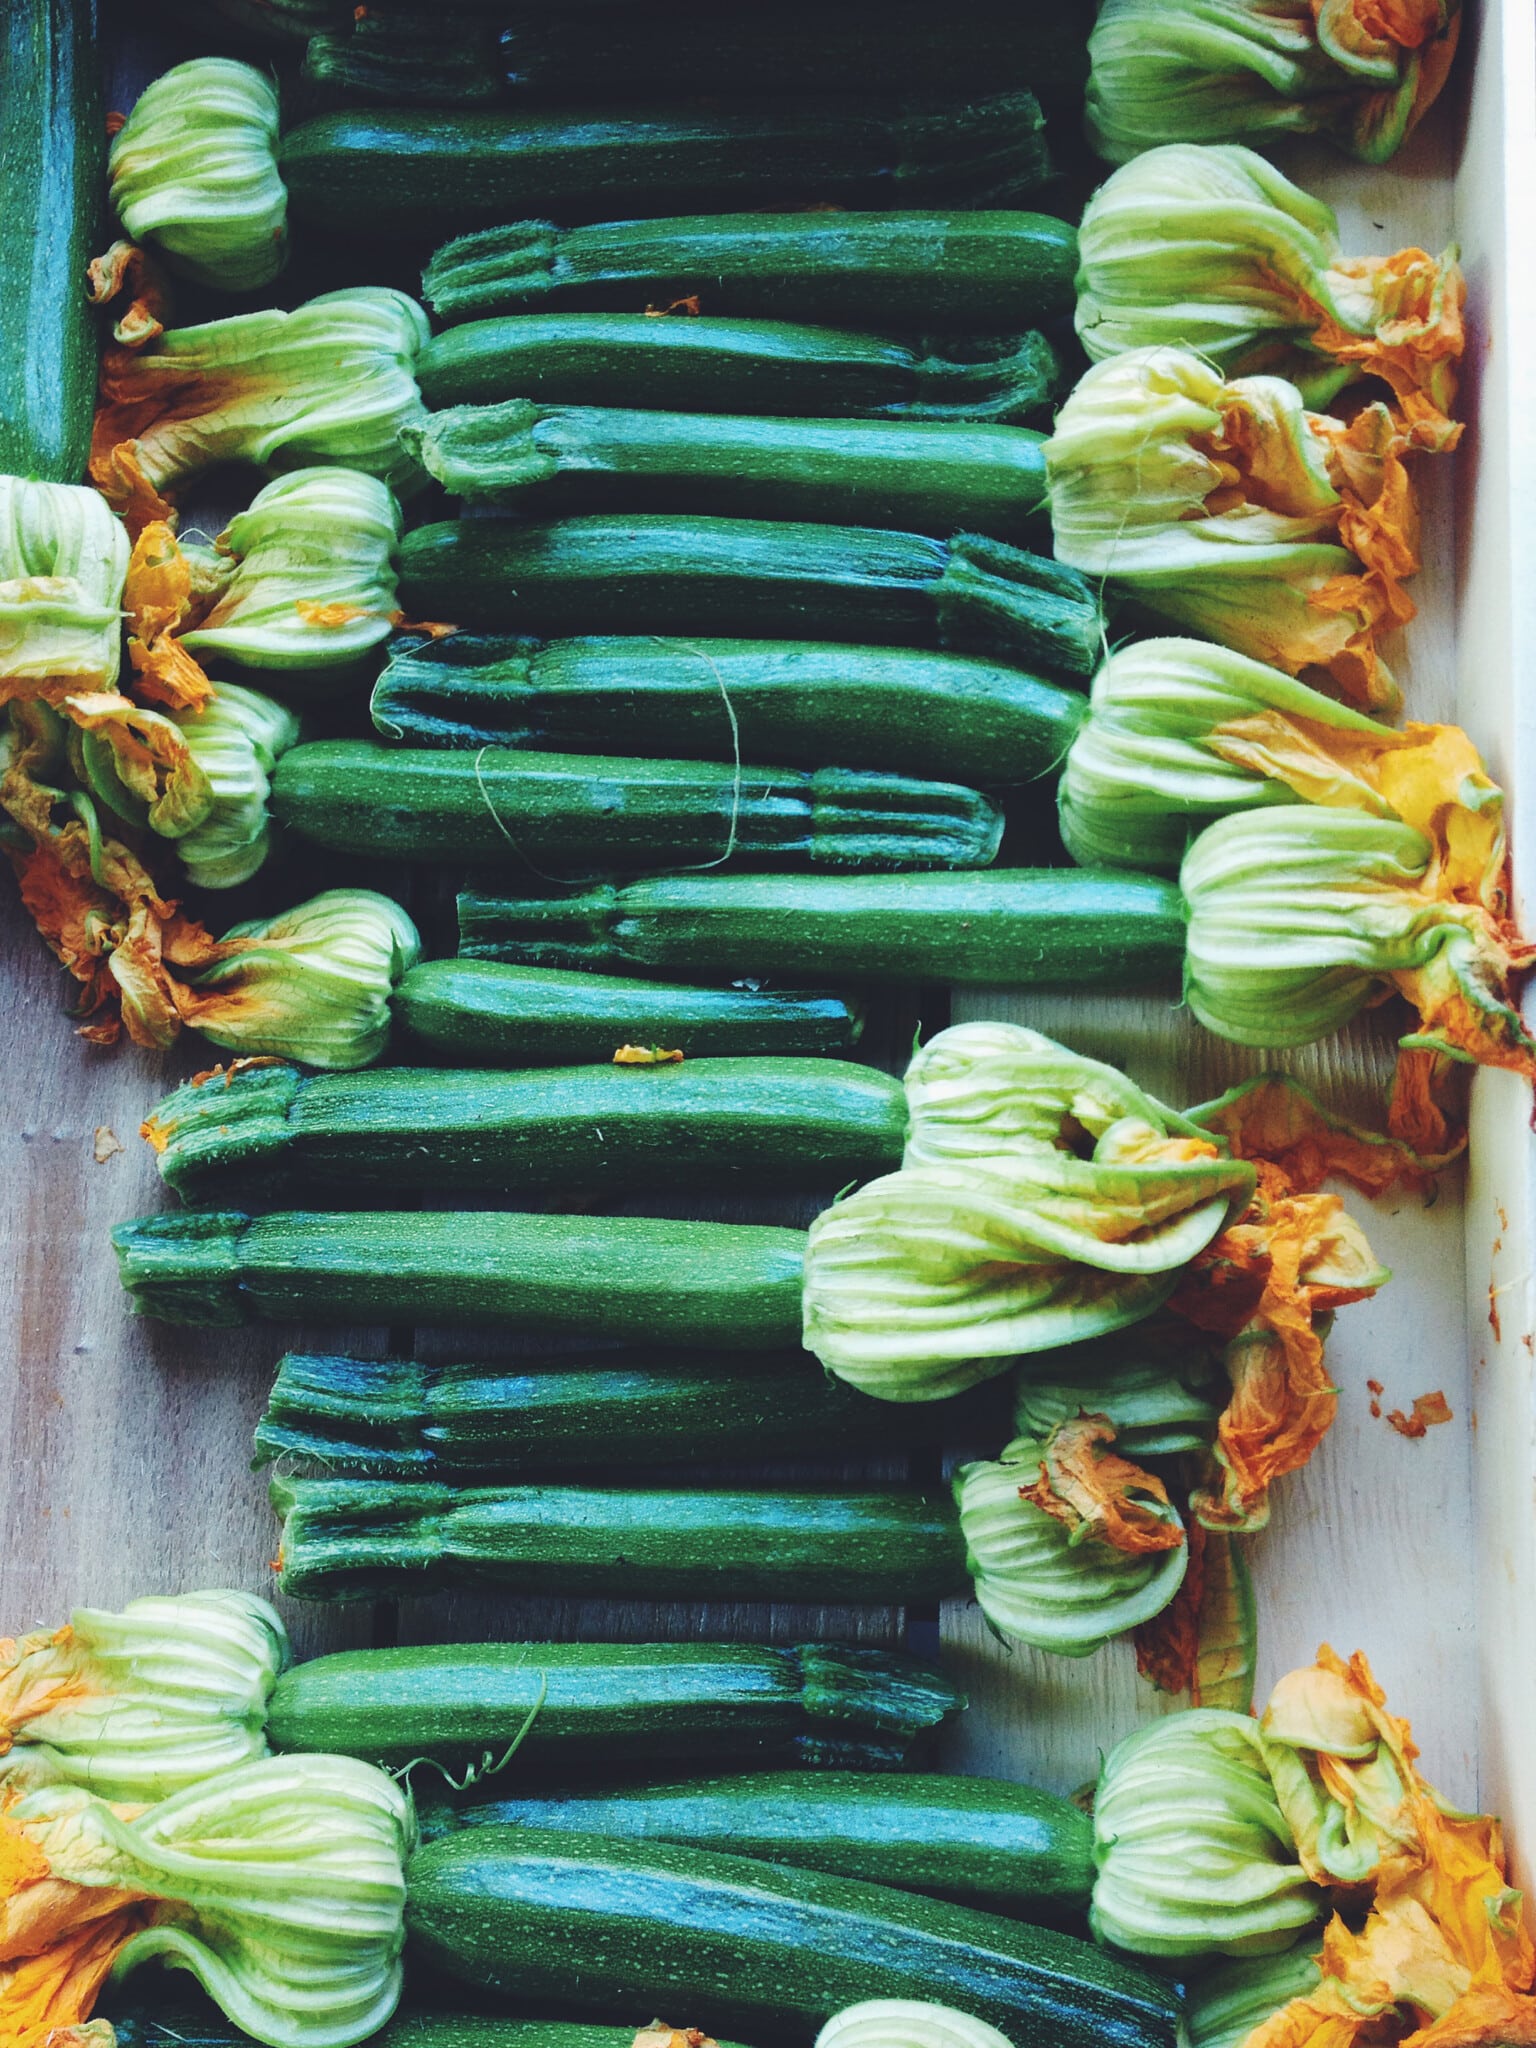 Zucchini With Flowers On End At A Market